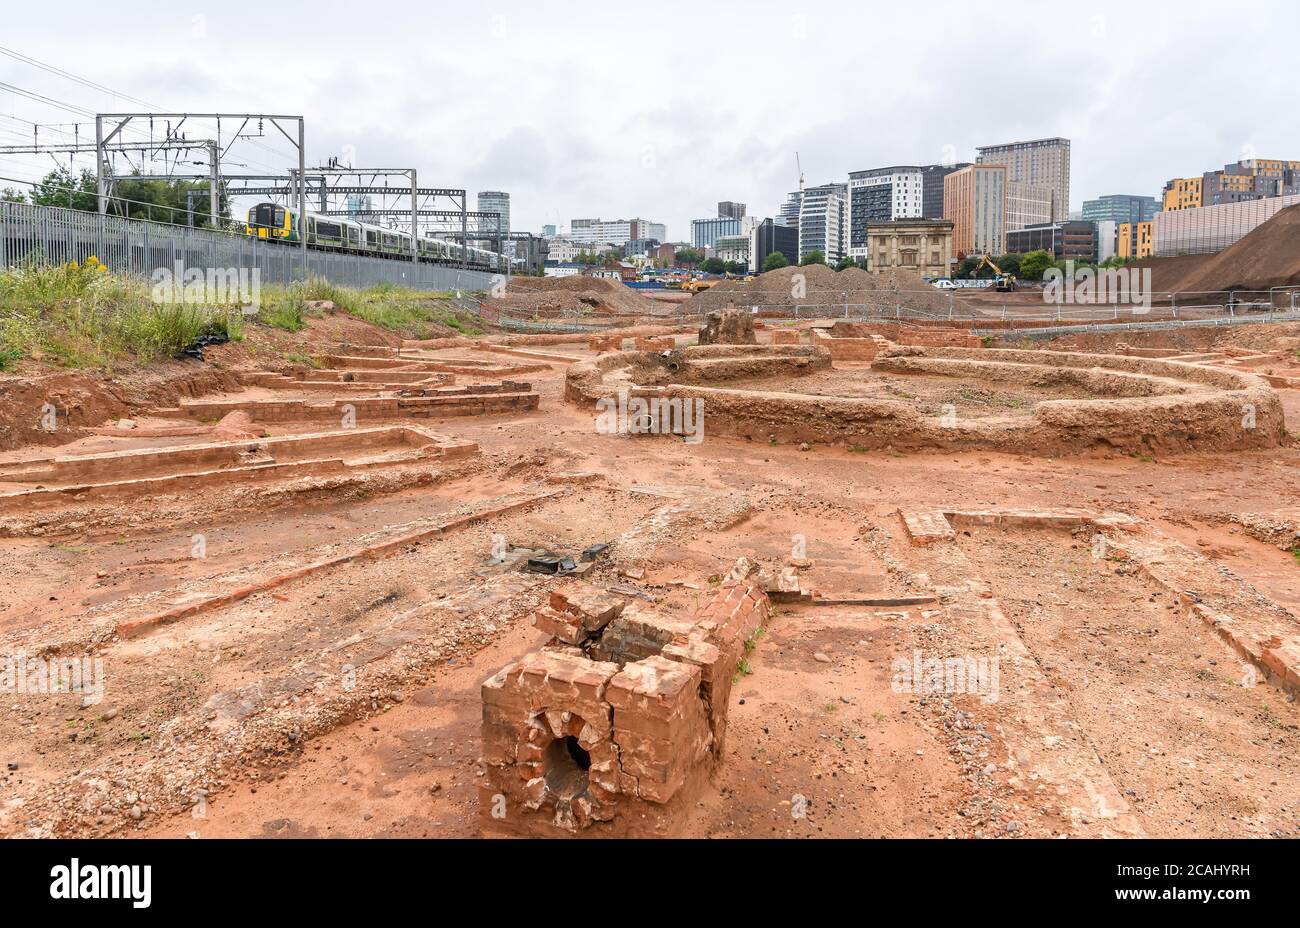 An 1837 Robert Stephenson designed railway turntable and roundhouse discovered on the site of the new HS2 Station at Curzon Street in Birmingham. The structure is part of remains of the former Grand Junction Railway Terminus. Possibly the worlds oldest example of a railway turn table. Stock Photo